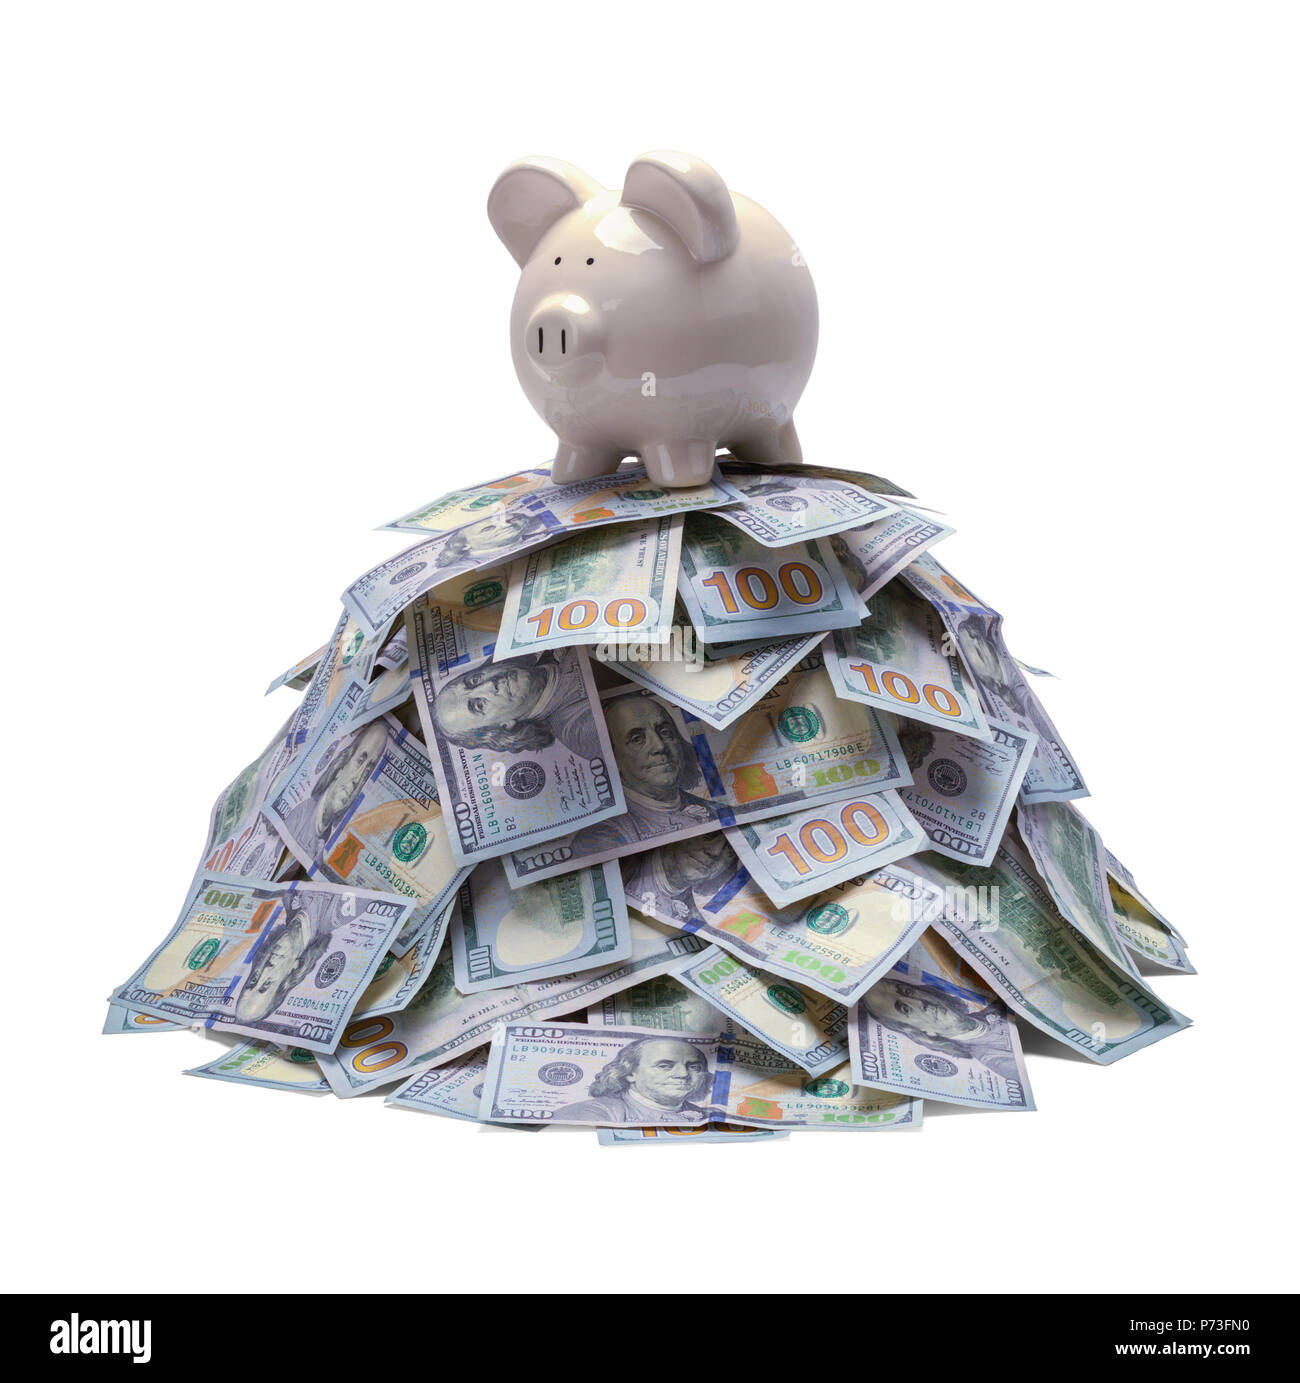 Pile of Money with Piggy Bank on Top Isolated on White. Stock Photo